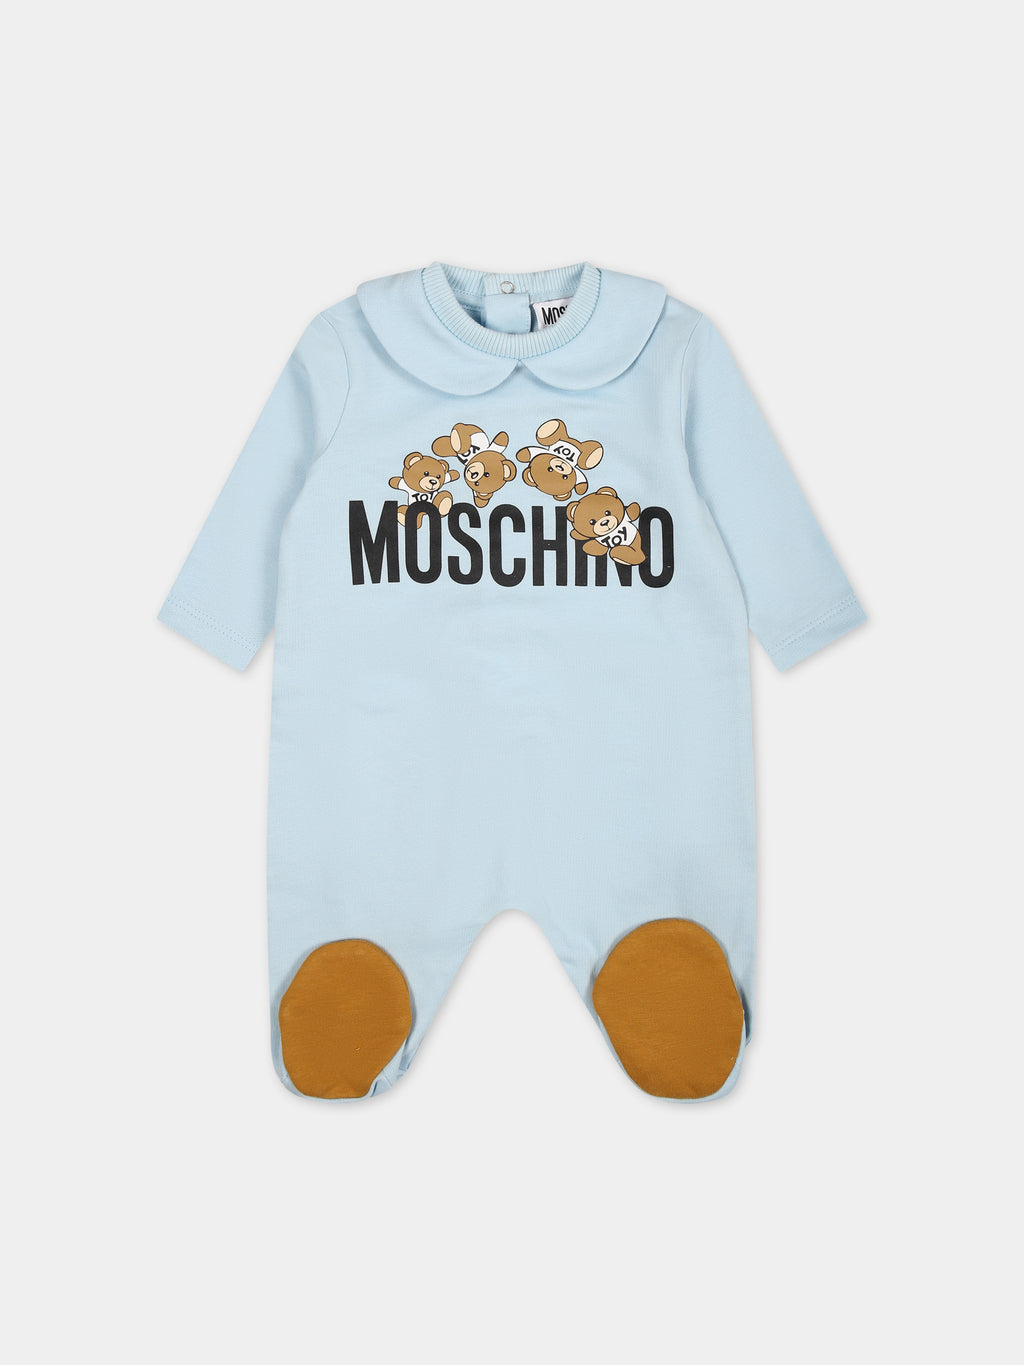 Light blue playsuit for baby boy with logo and Teddy Bear